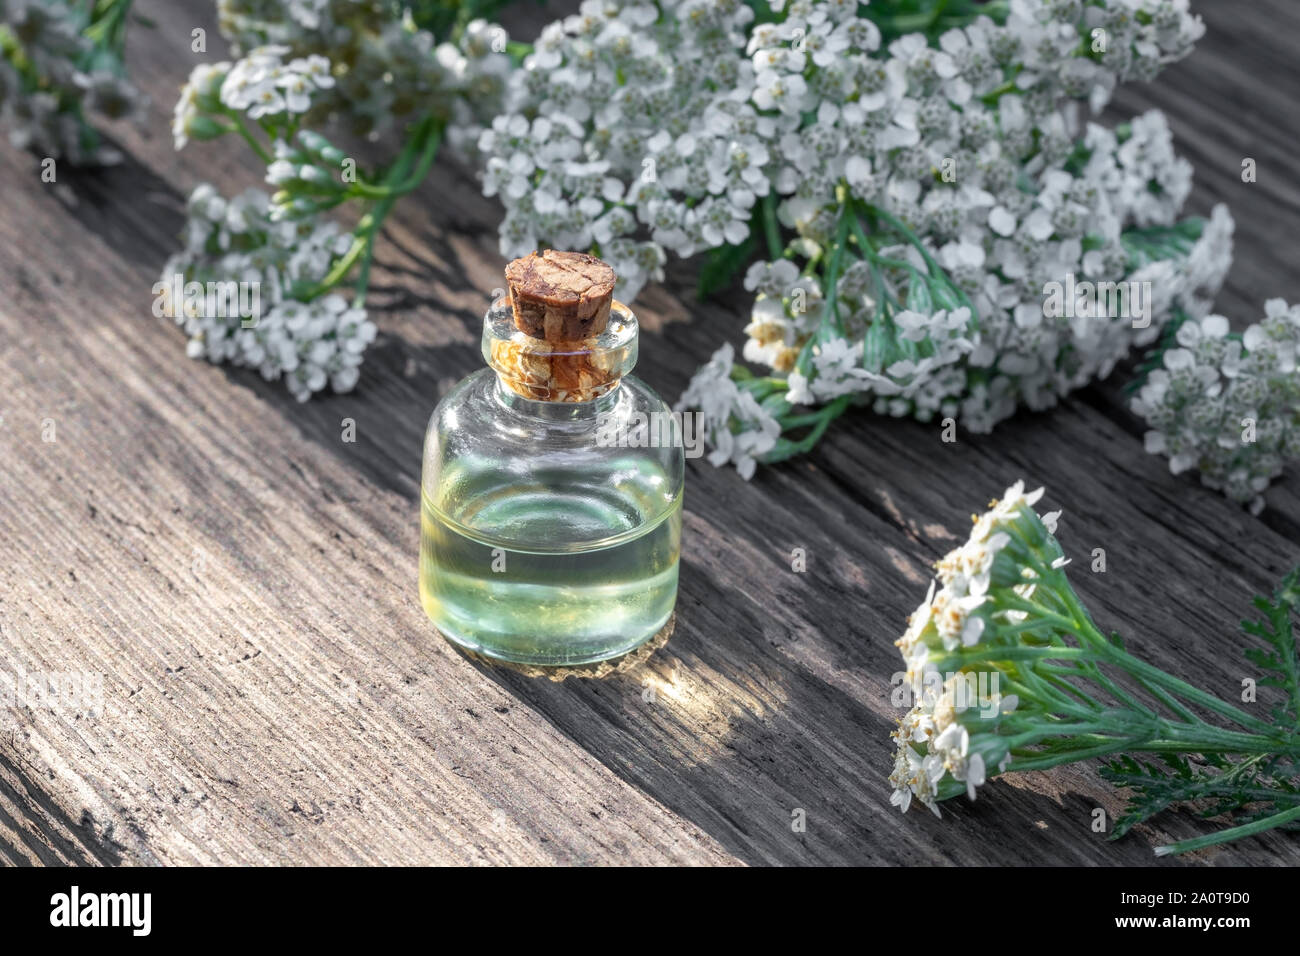 A bottle of essential oil with blooming yarrow plant Stock Photo